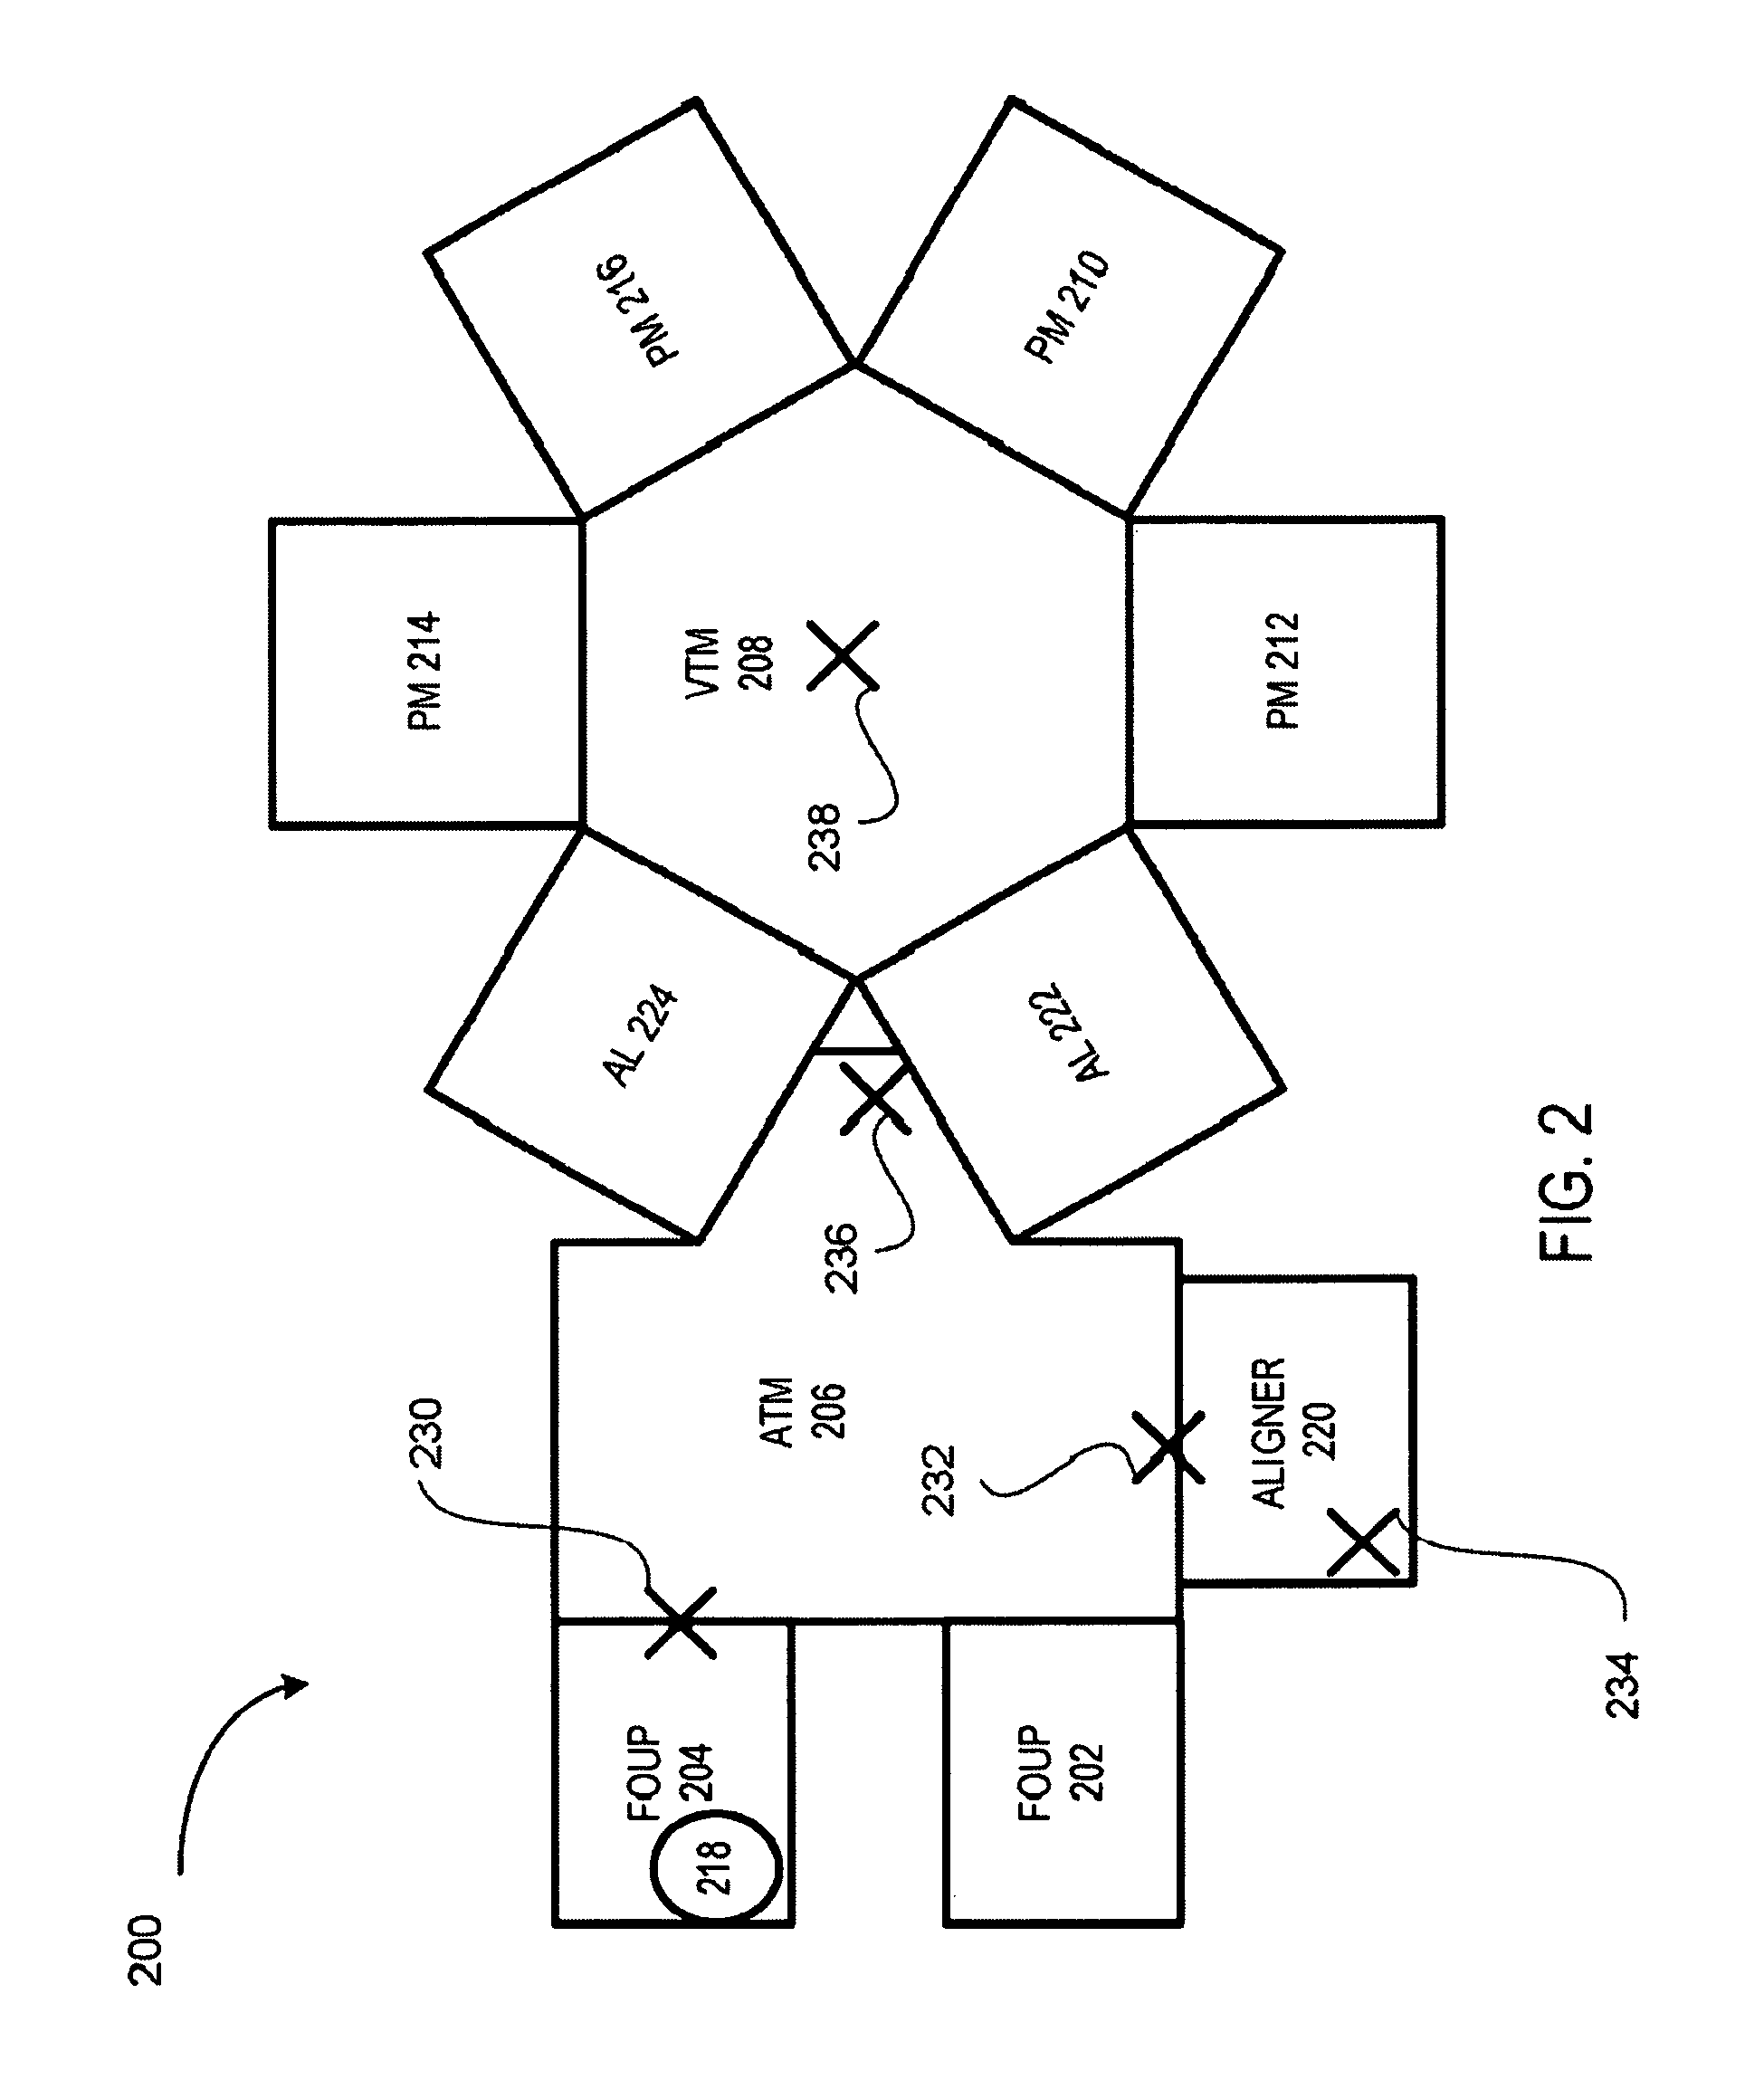 Wafer bow metrology arrangements and methods thereof